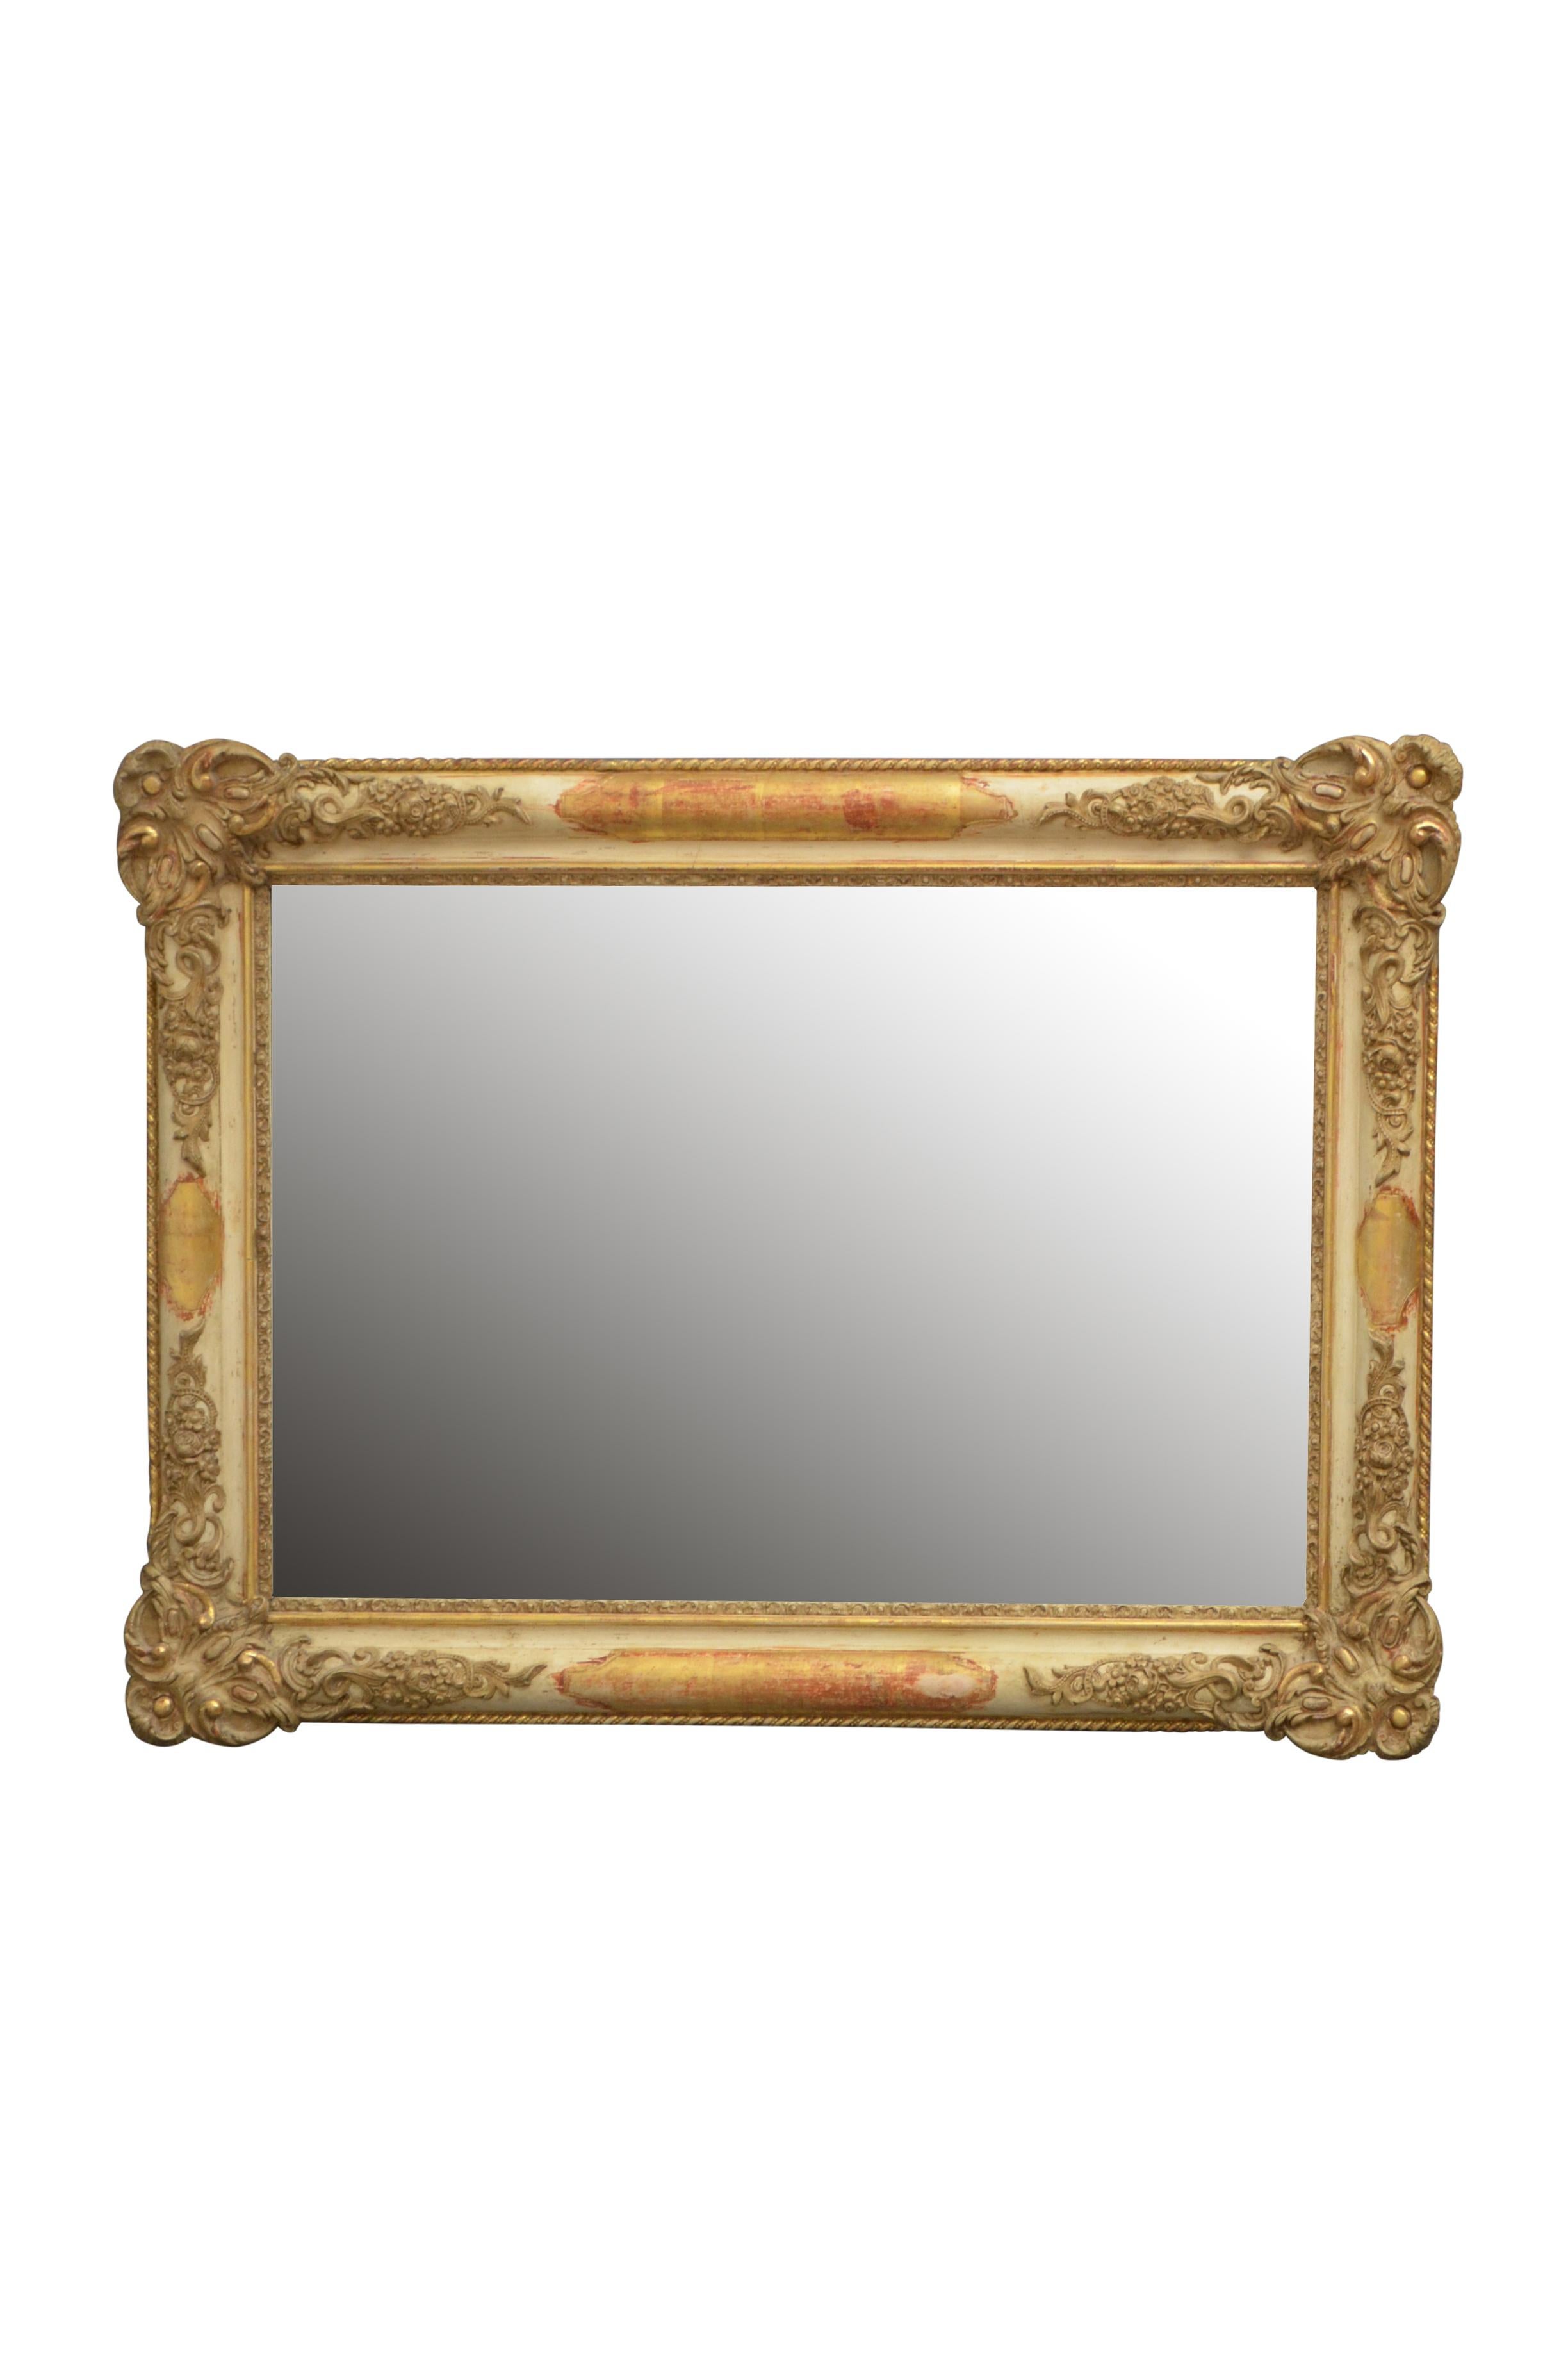 K0418 A XIXth century French mirror of versatile form could be positioned portrait or landscape, having original mirror plate with some foxing in beautifully carved and gilded frame. This antique gilt mirror retains its original glass and gilt,